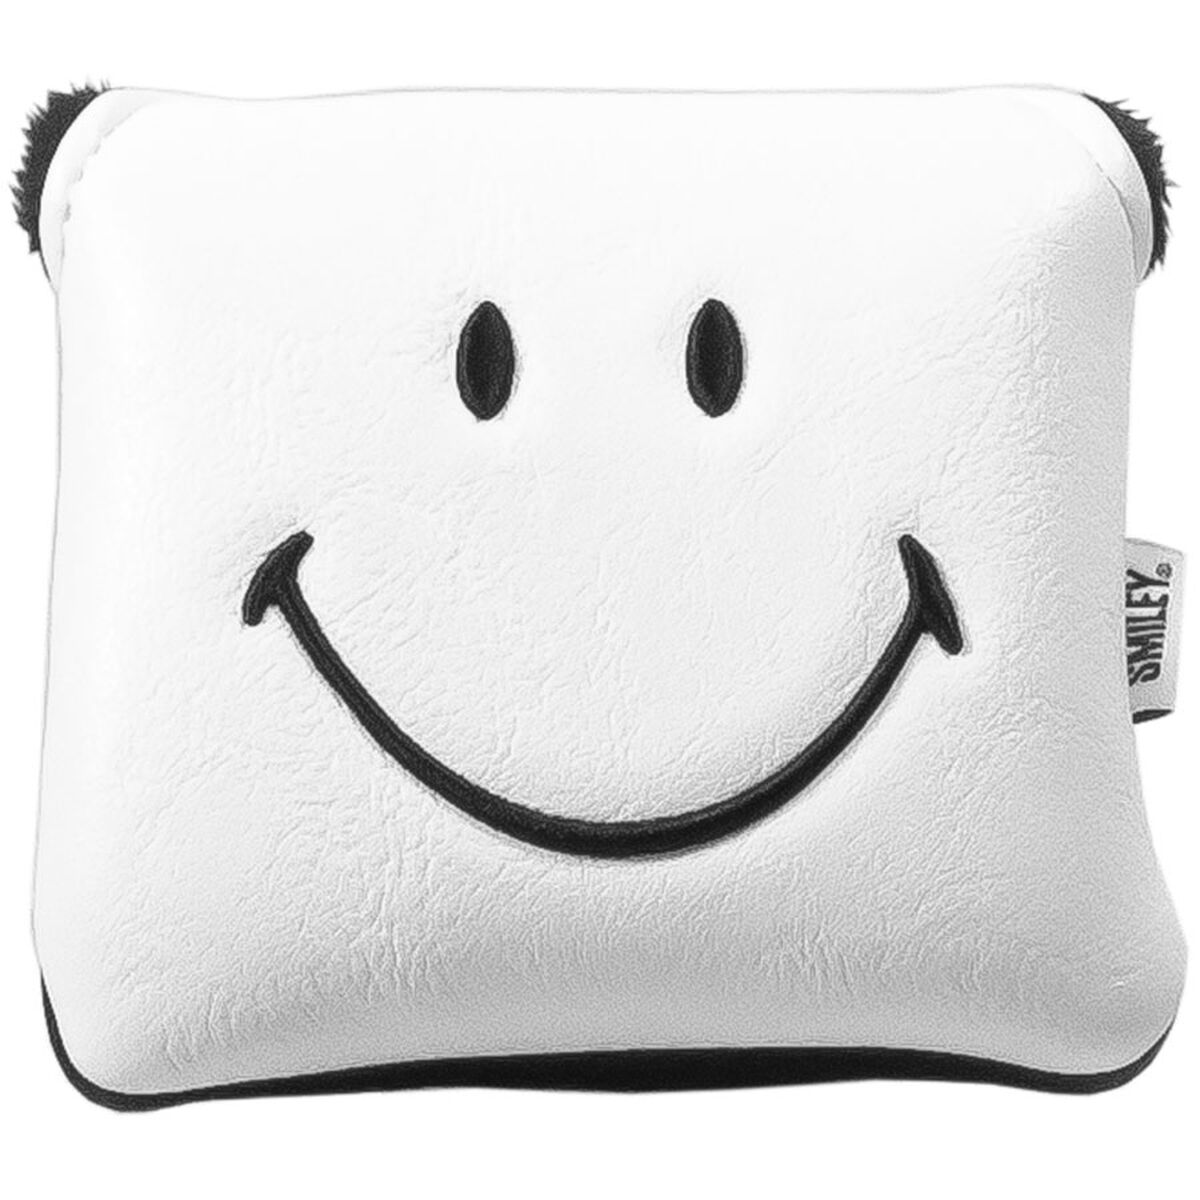 Smiley Original Classic Mallet Golf Putter Head Cover, Mens, Mallet, White | American Golf